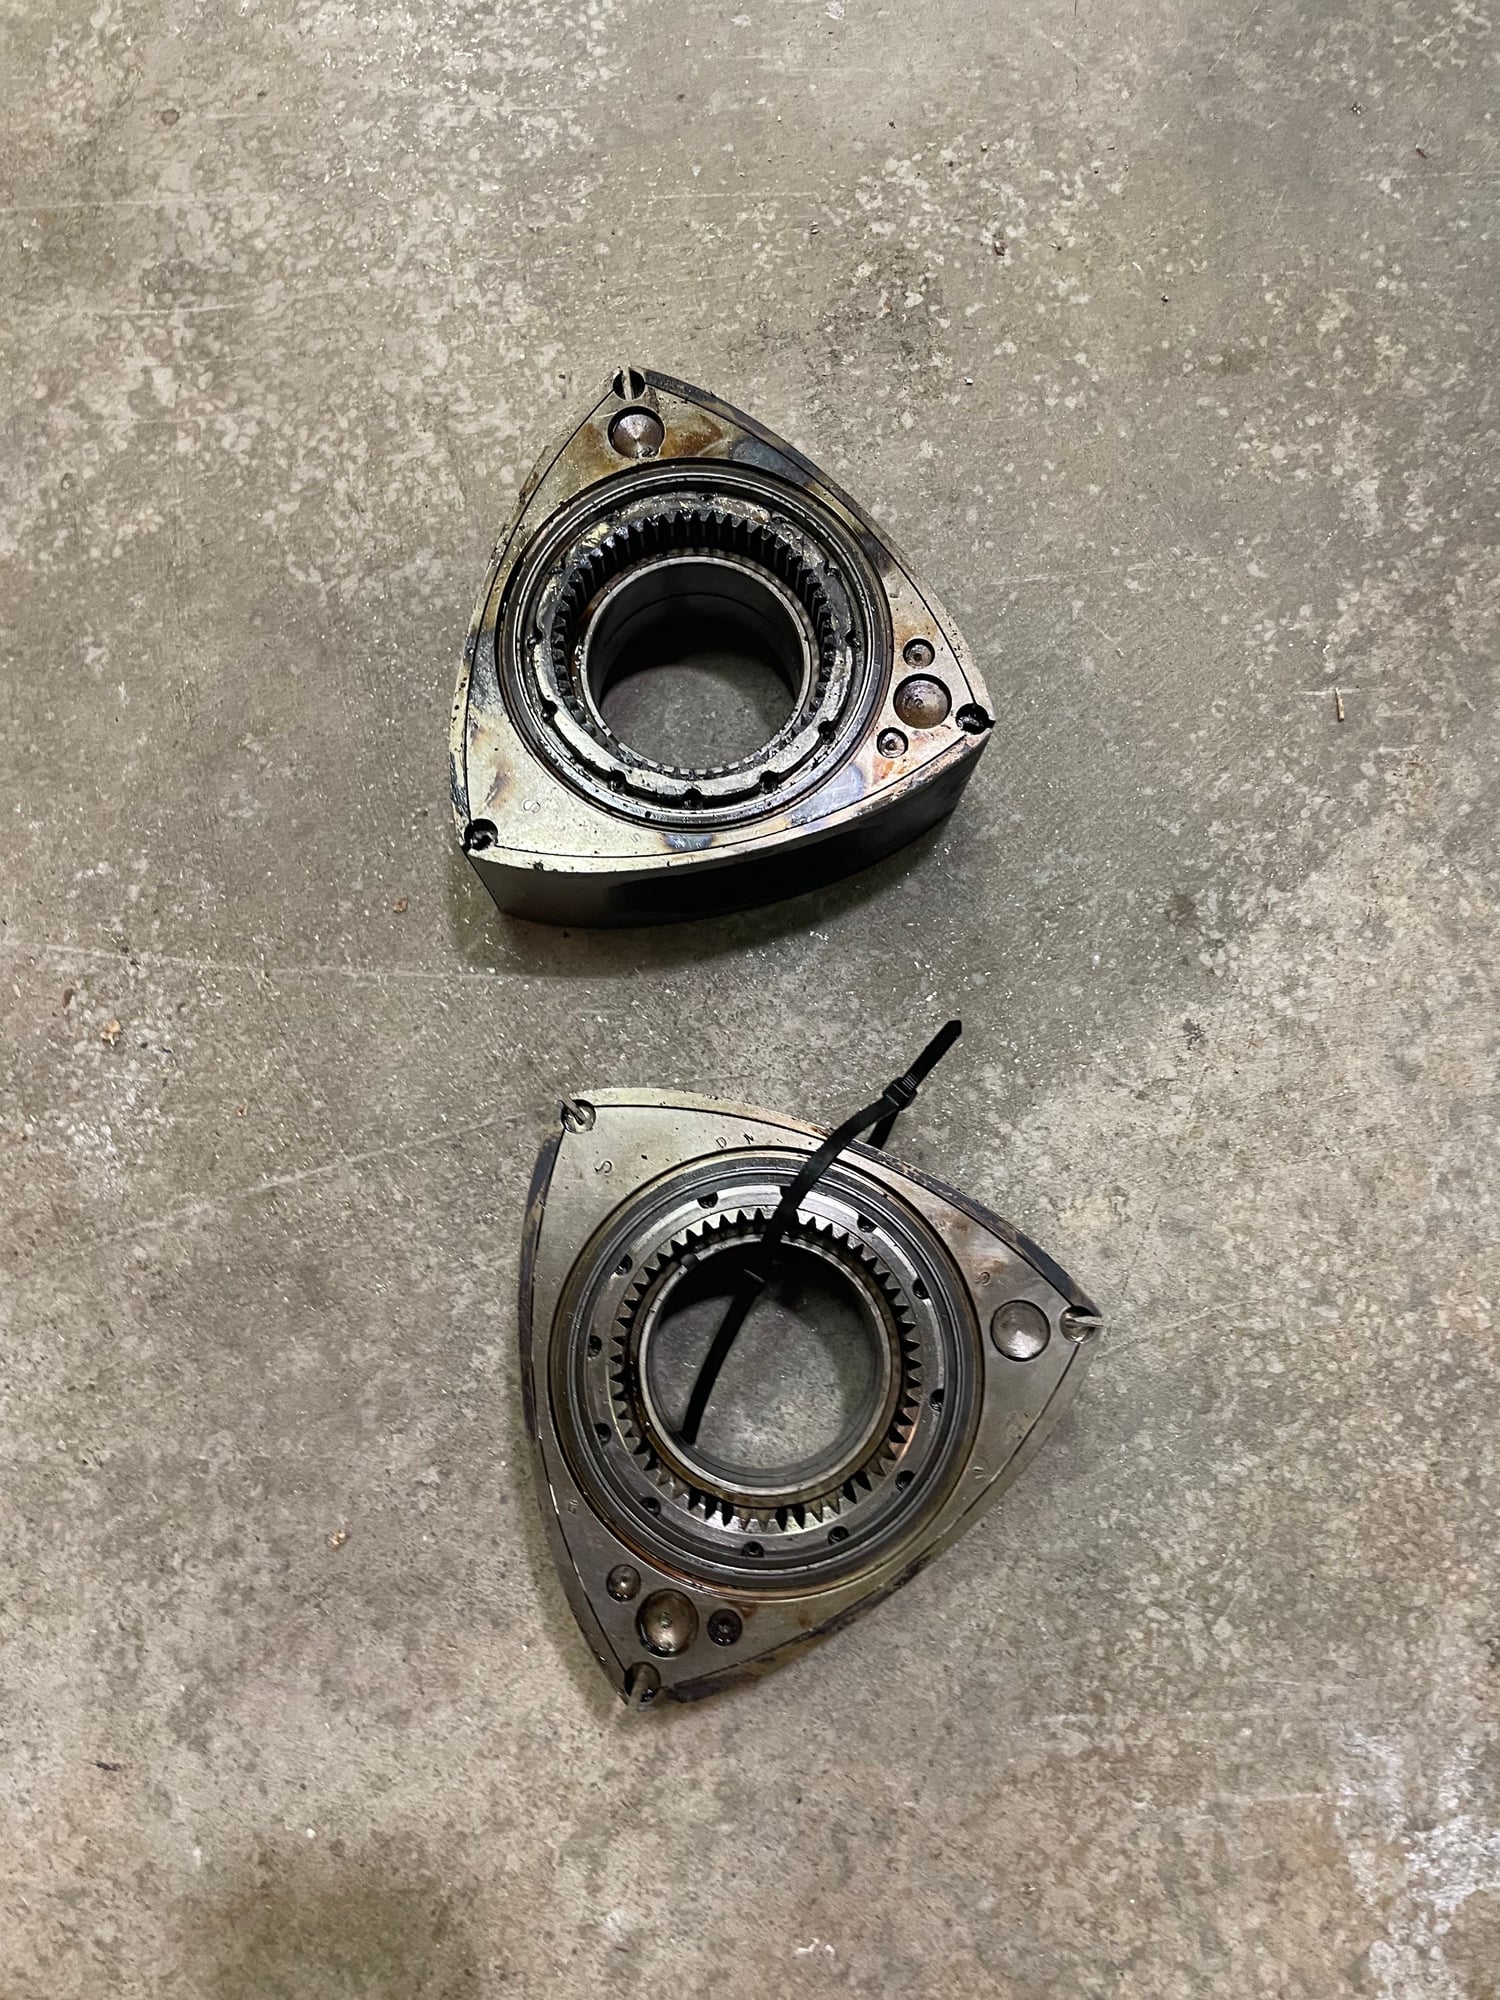 Engine - Internals - Need turbo rotors and turbo housings - Used - 0  All Models - Fullerton, CA 92831, United States